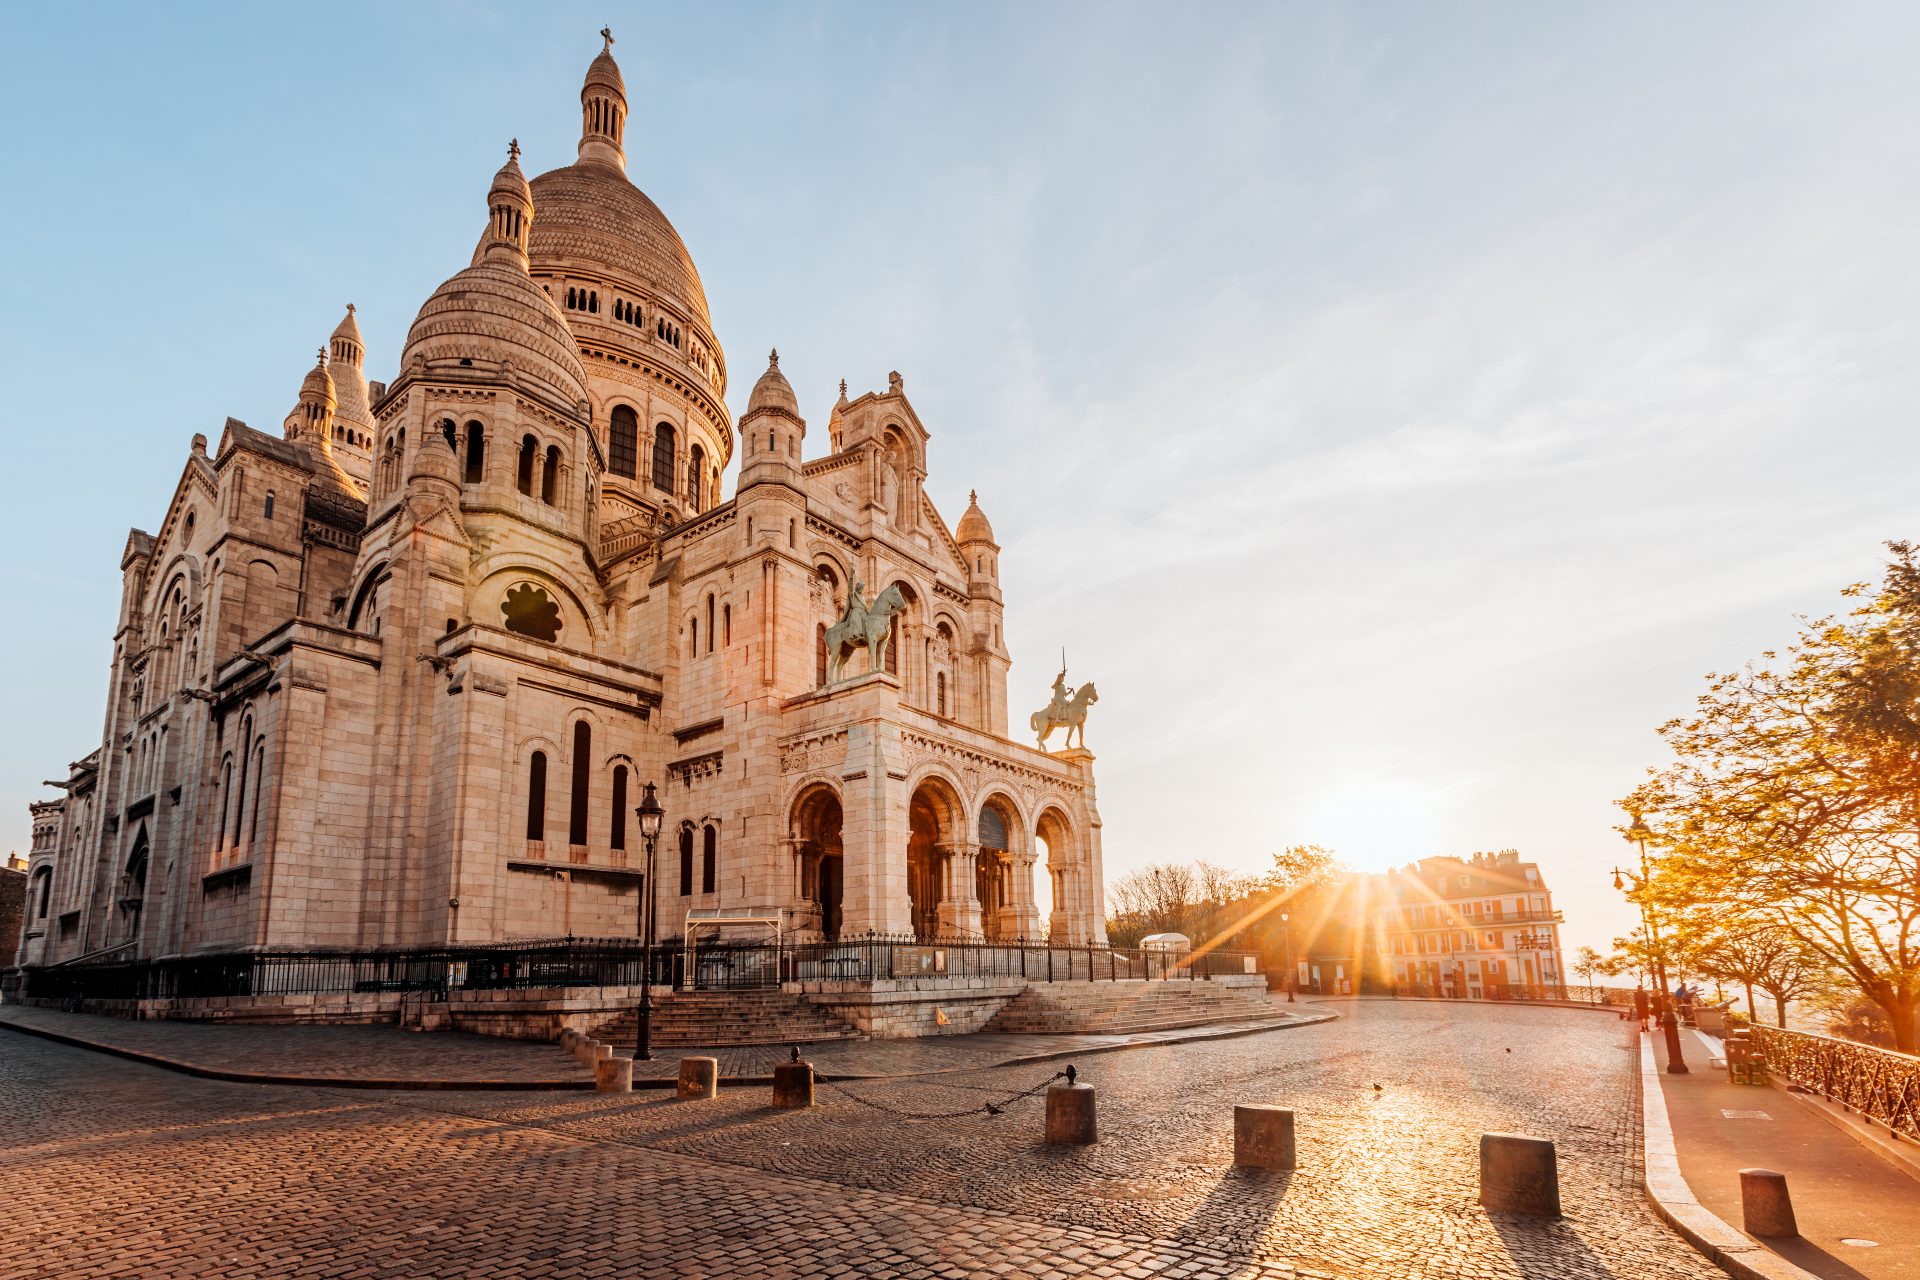 <p>Whether you live in Paris or are just visiting the French capital, you're going to love (re)discovering these 15 charming places that ooze love and romance. Pack your bags; we're off for a stroll through the City of Love! And just as a hint, it's much better than a box of chocolates!</p> <p><a href="https://www.msn.com/en-us/channel/source/Showbizz%20Daily%20English/sr-vid-w8hcuhvu3f8qr5wn5rk8xhsu5x8irqrgtxcypg4uxvn7tq9vkkfa?cvid=cddbc5c4fc9748a196a59c4cb5f3d12a&ei=7" rel="noopener">Follow Showbizz Daily to stay informed and enjoy more content!</a></p>